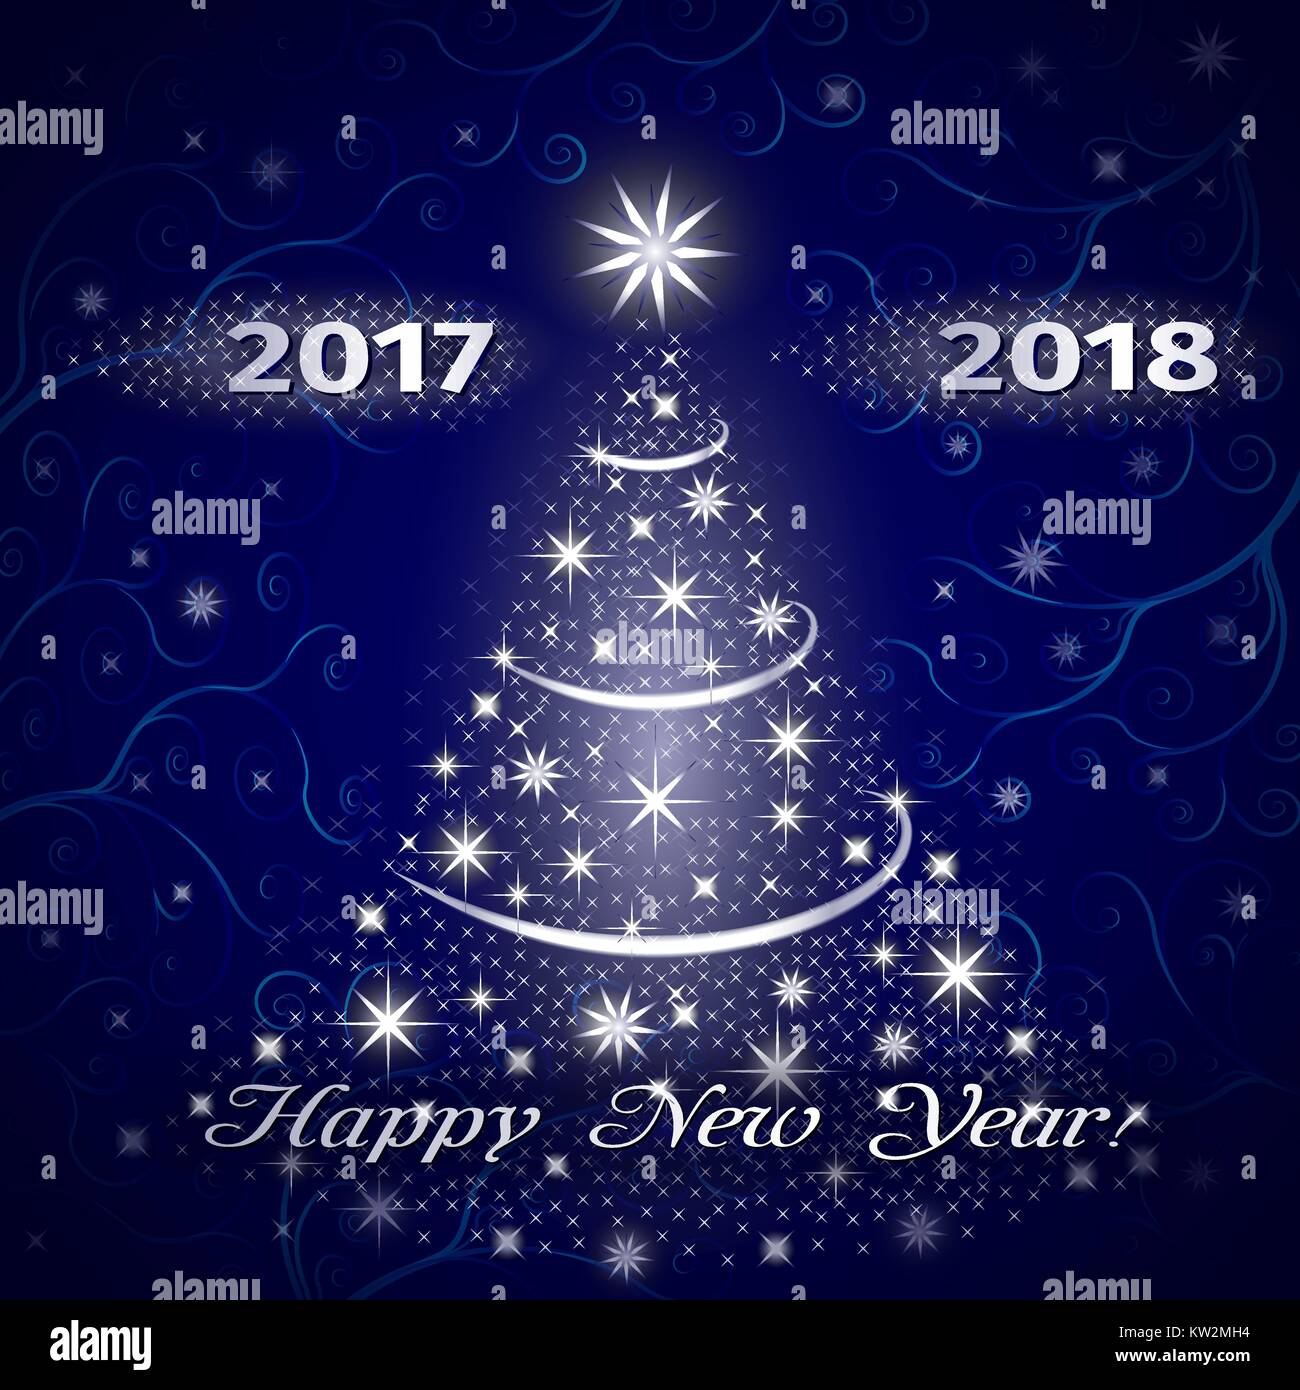 Happy New Year 2018 greeting card in blue Stock Vector